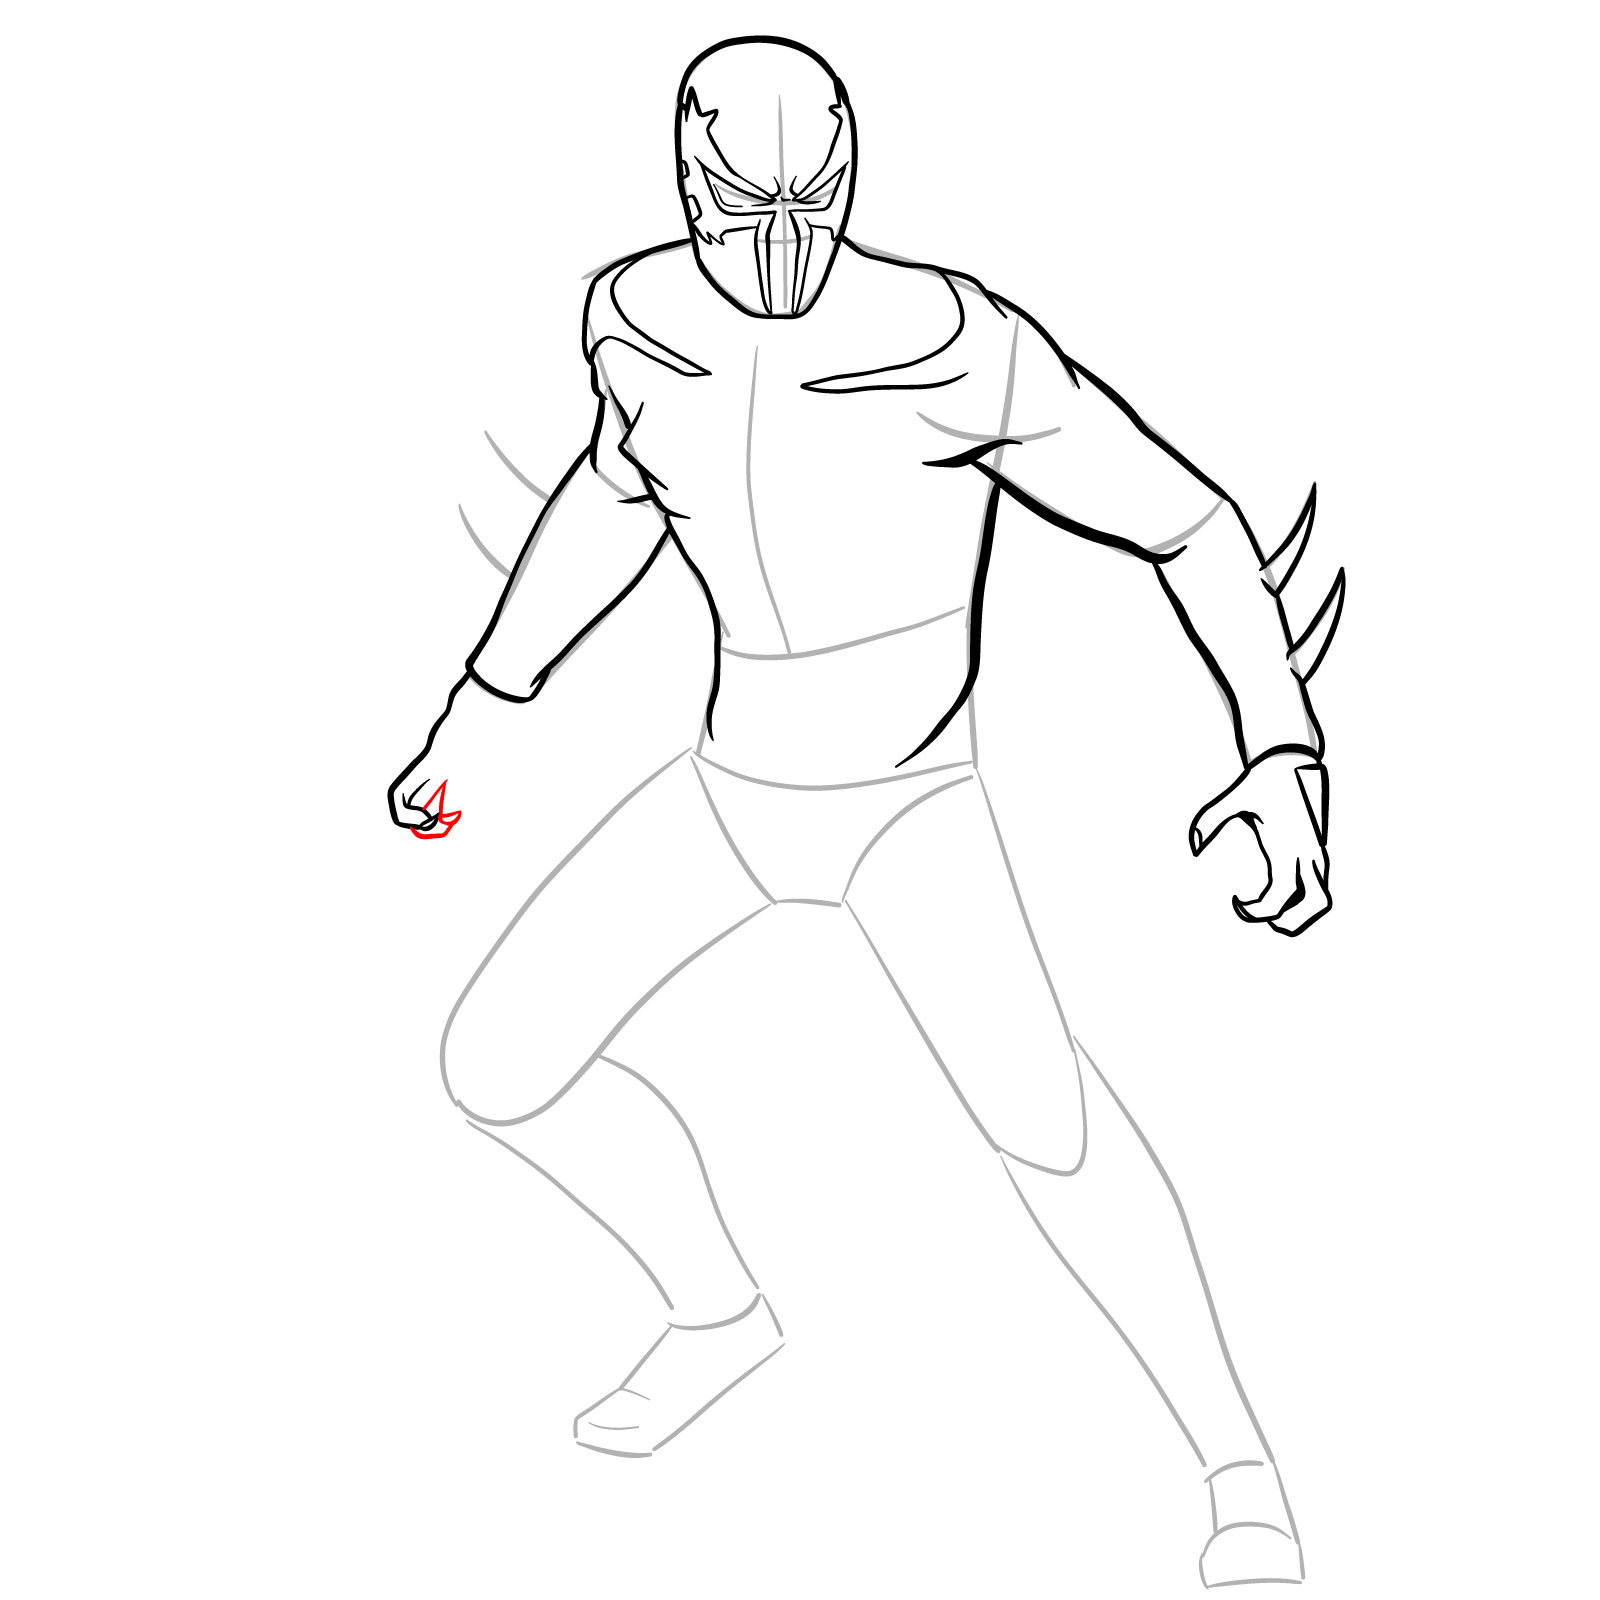 How to draw Spider-Man 2099 - step 21